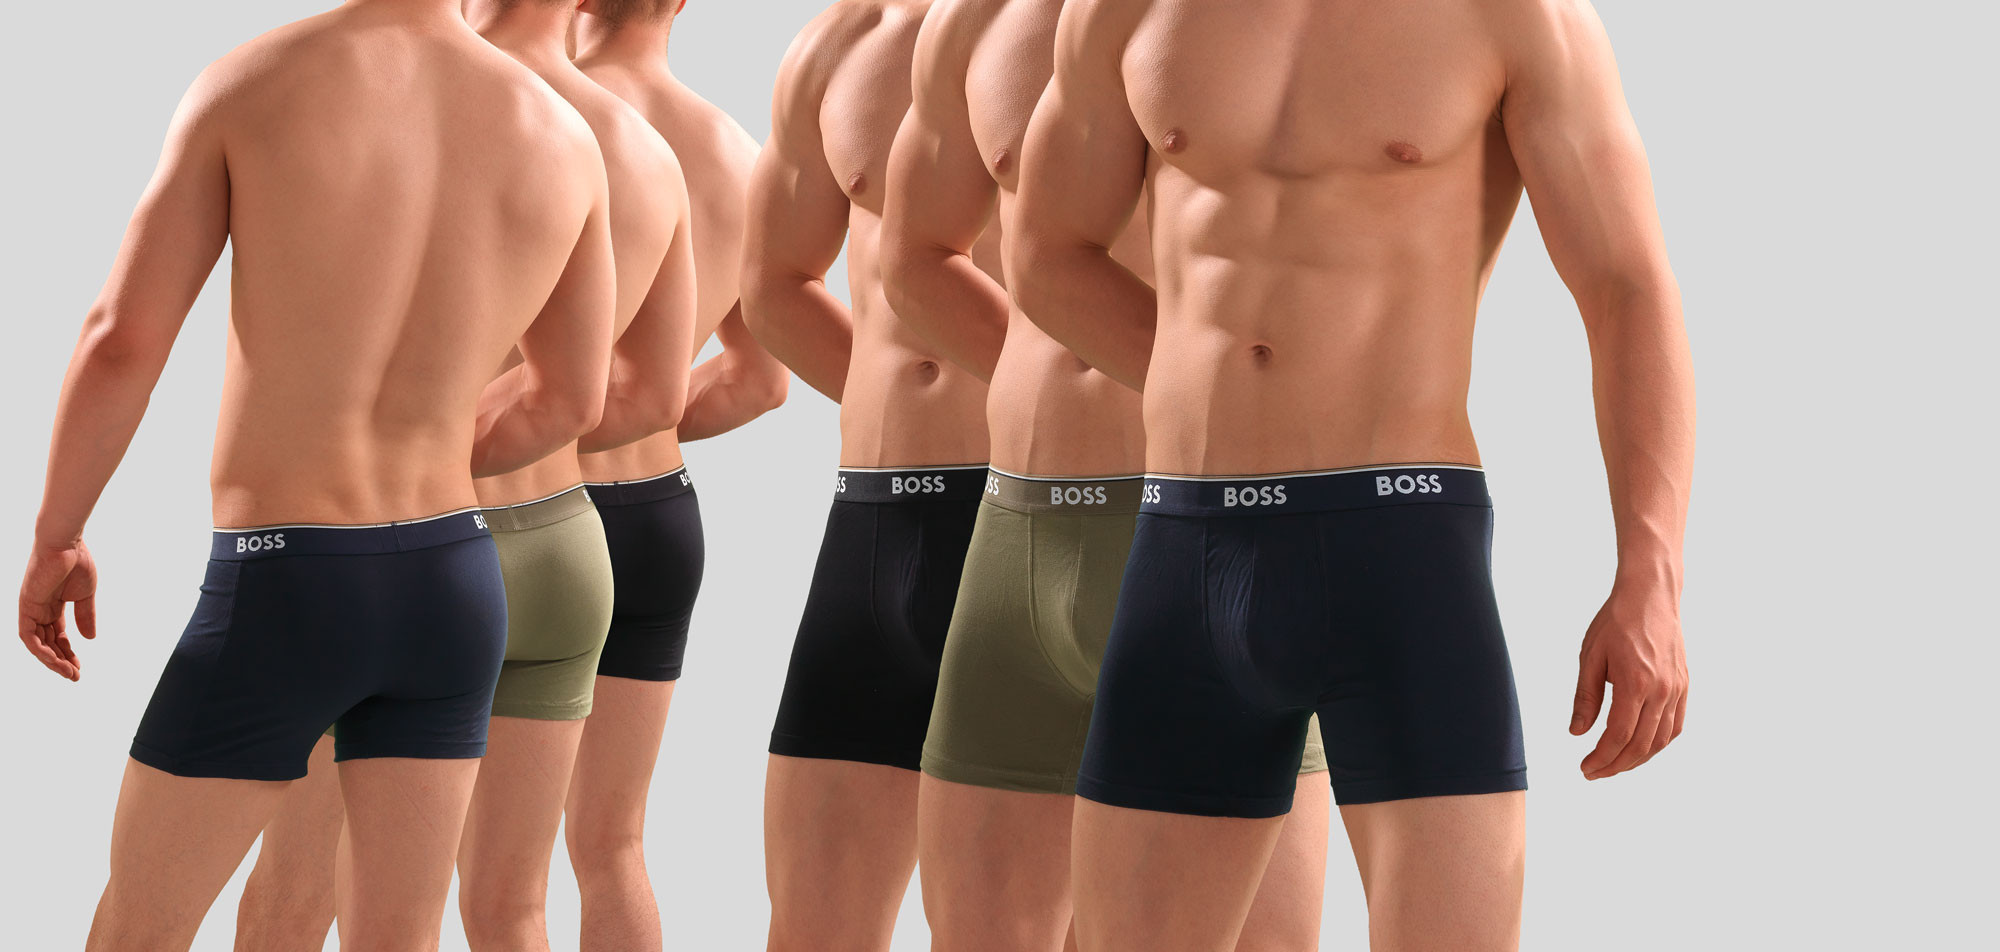 Boss Boxer Brief 3-Pack 828 Power, color Nee